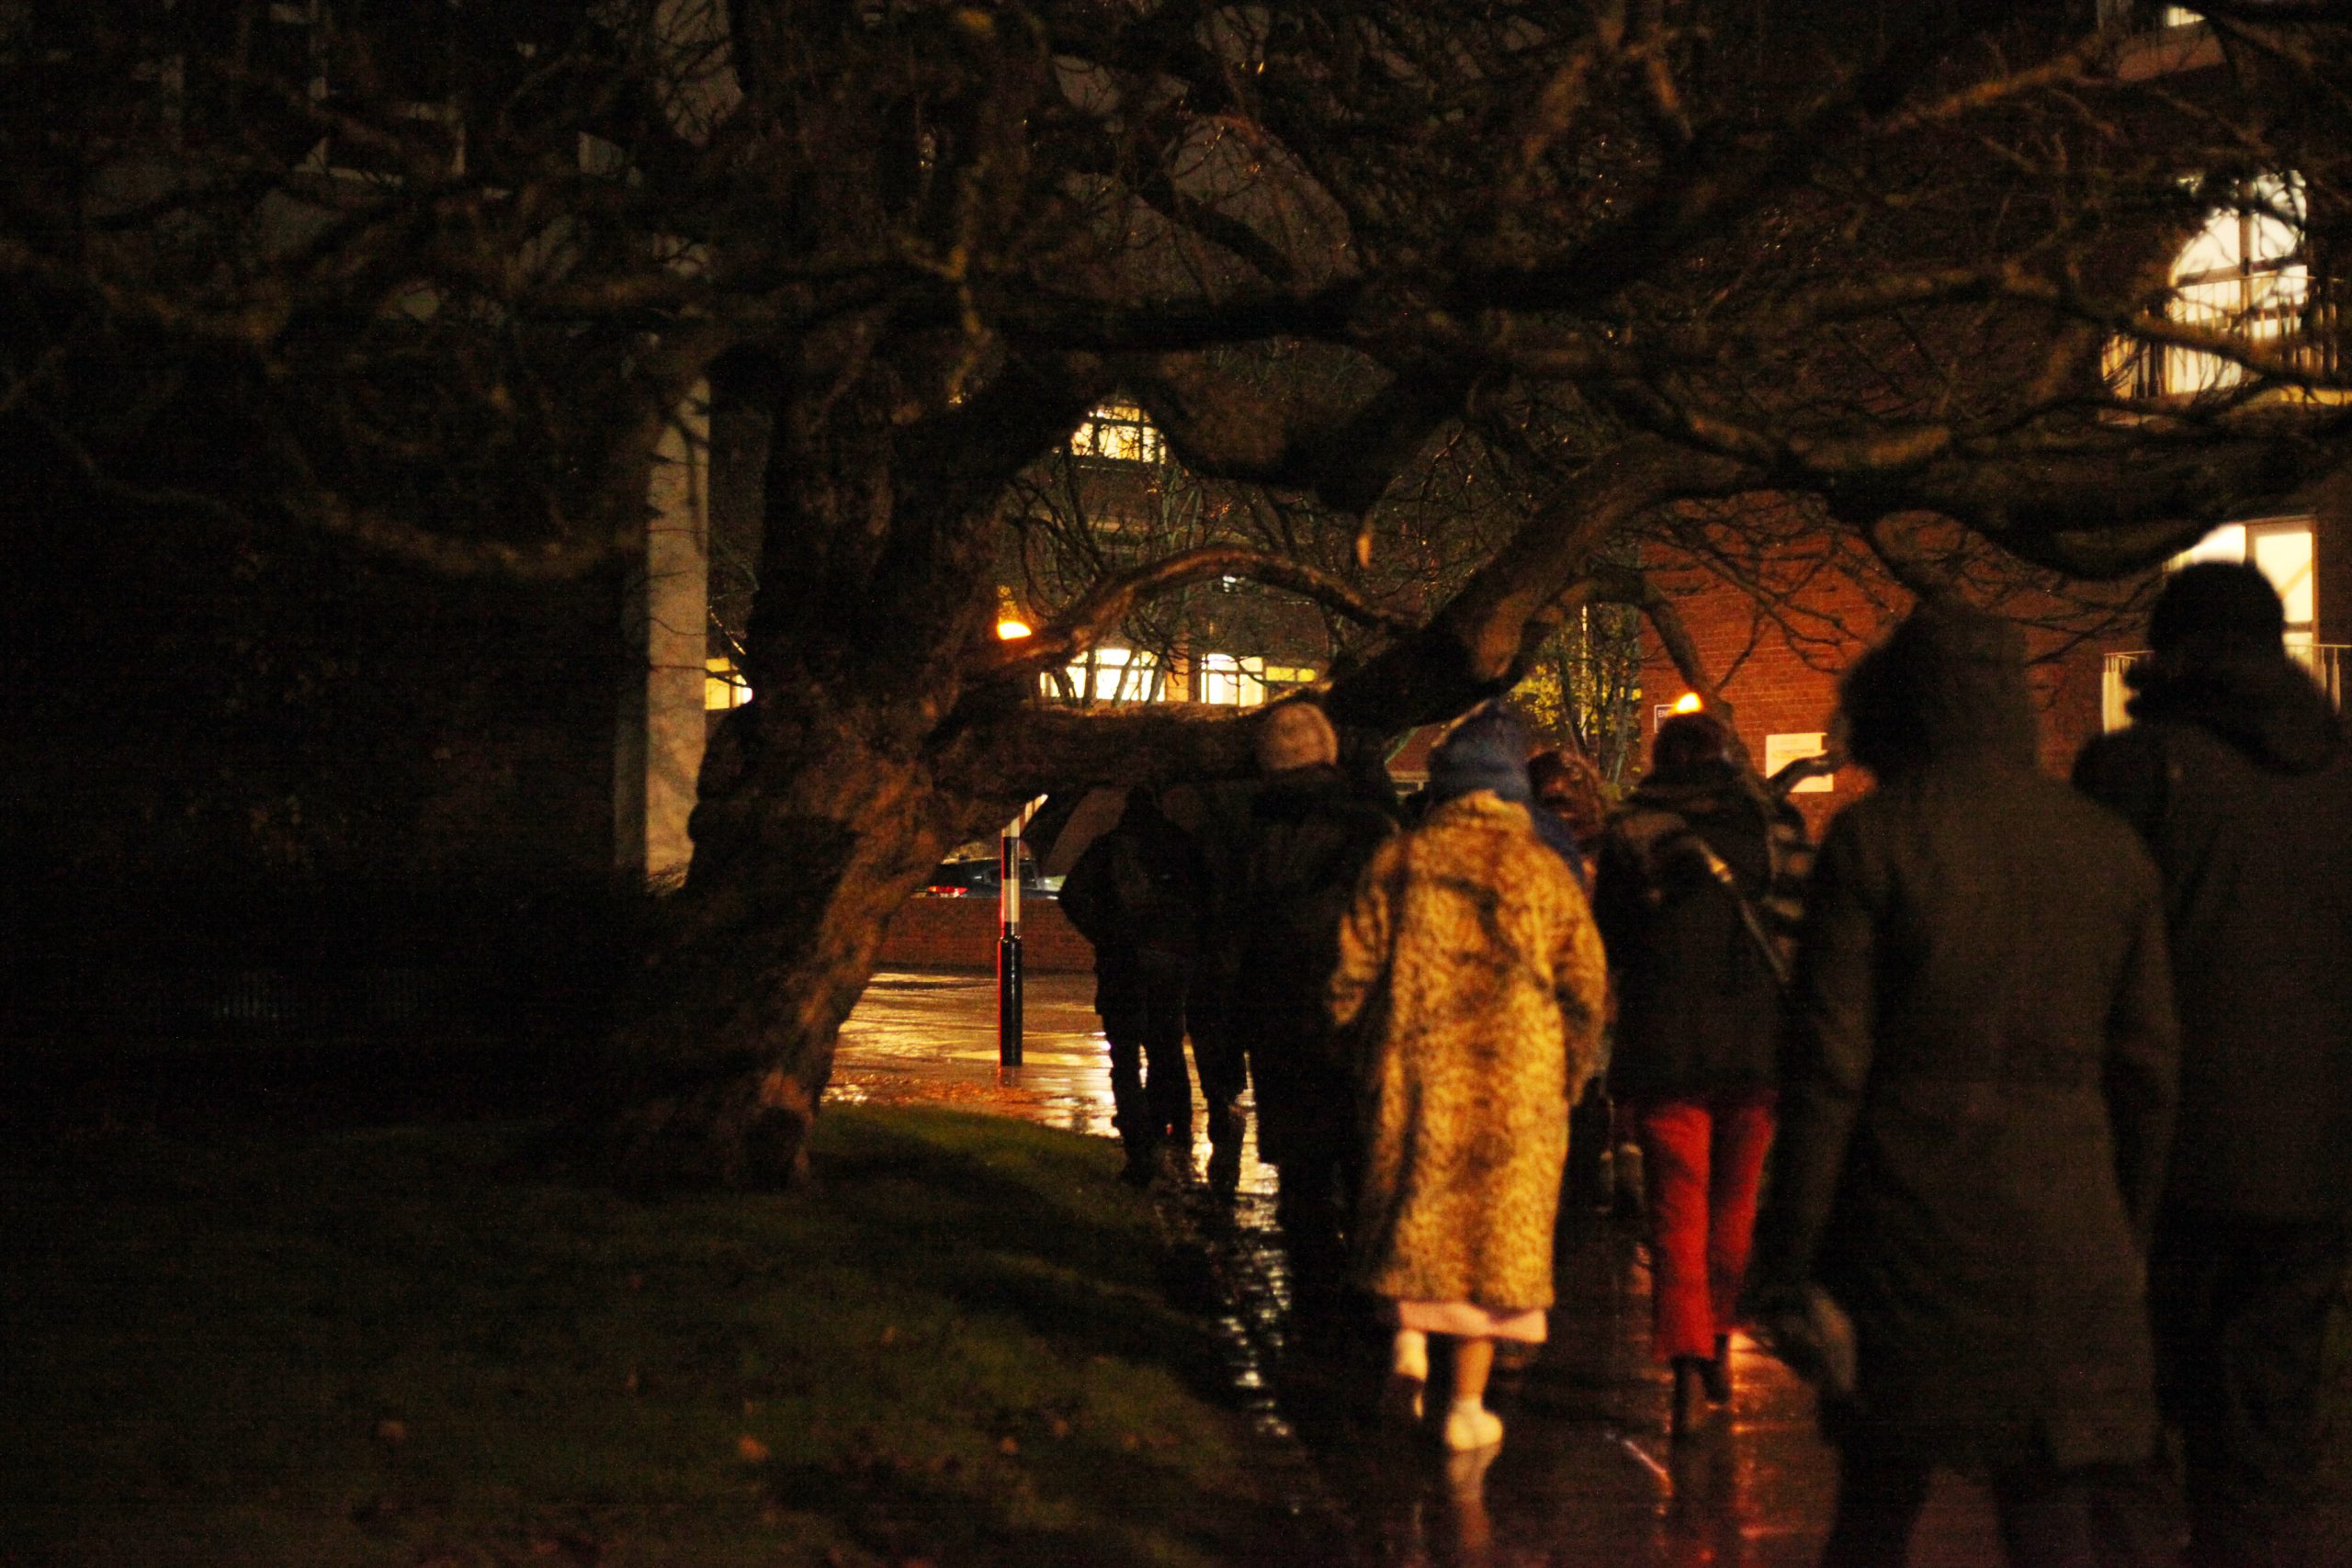 people walking under the Indian Bean Tree on a nighttime street